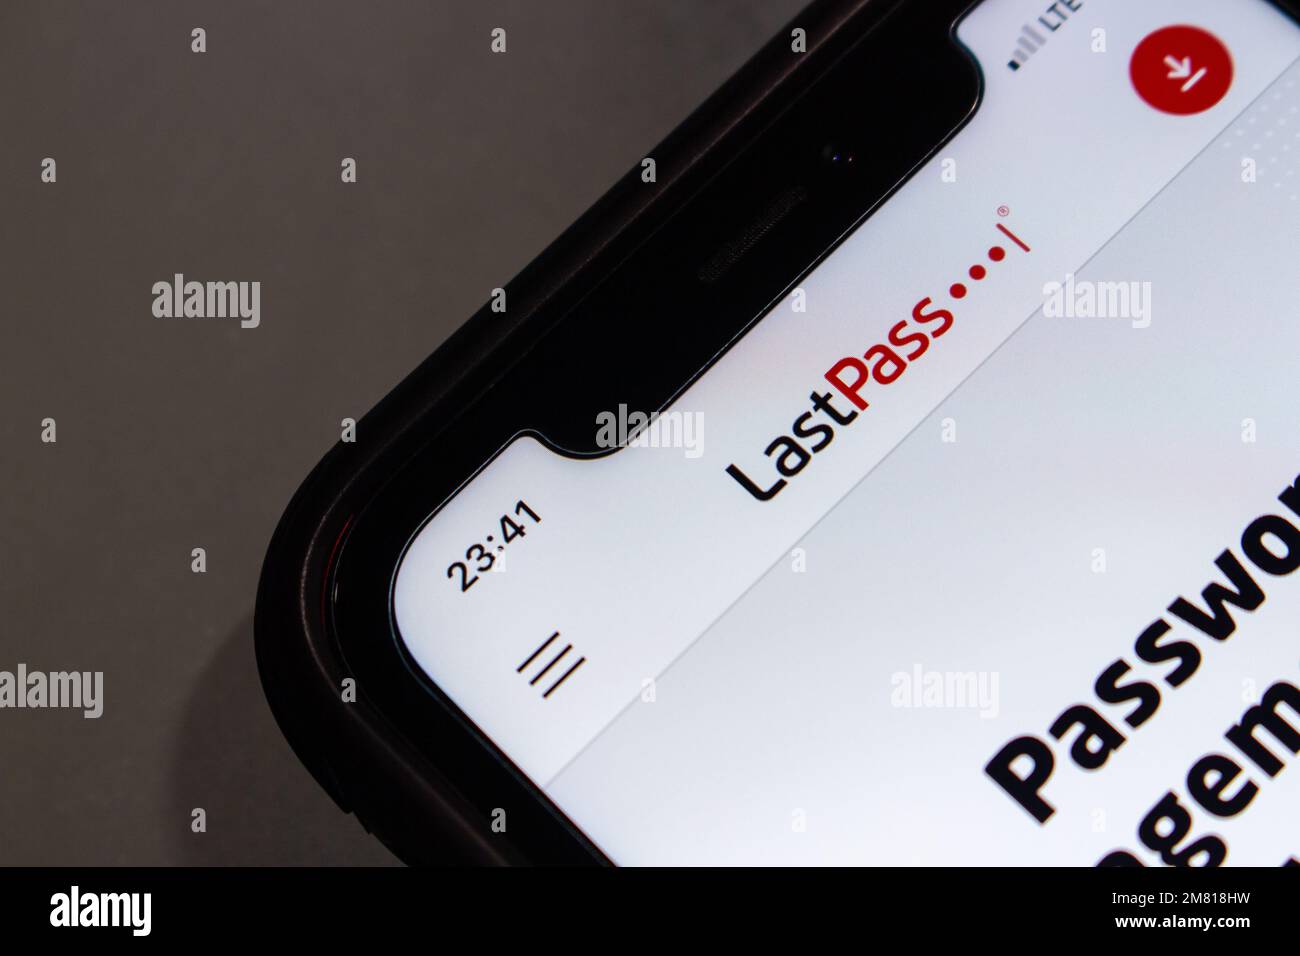 Logo of LastPass in its website on iPhone. LastPass is a password manager distributed in subscription form & freemium model with limited functionality Stock Photo